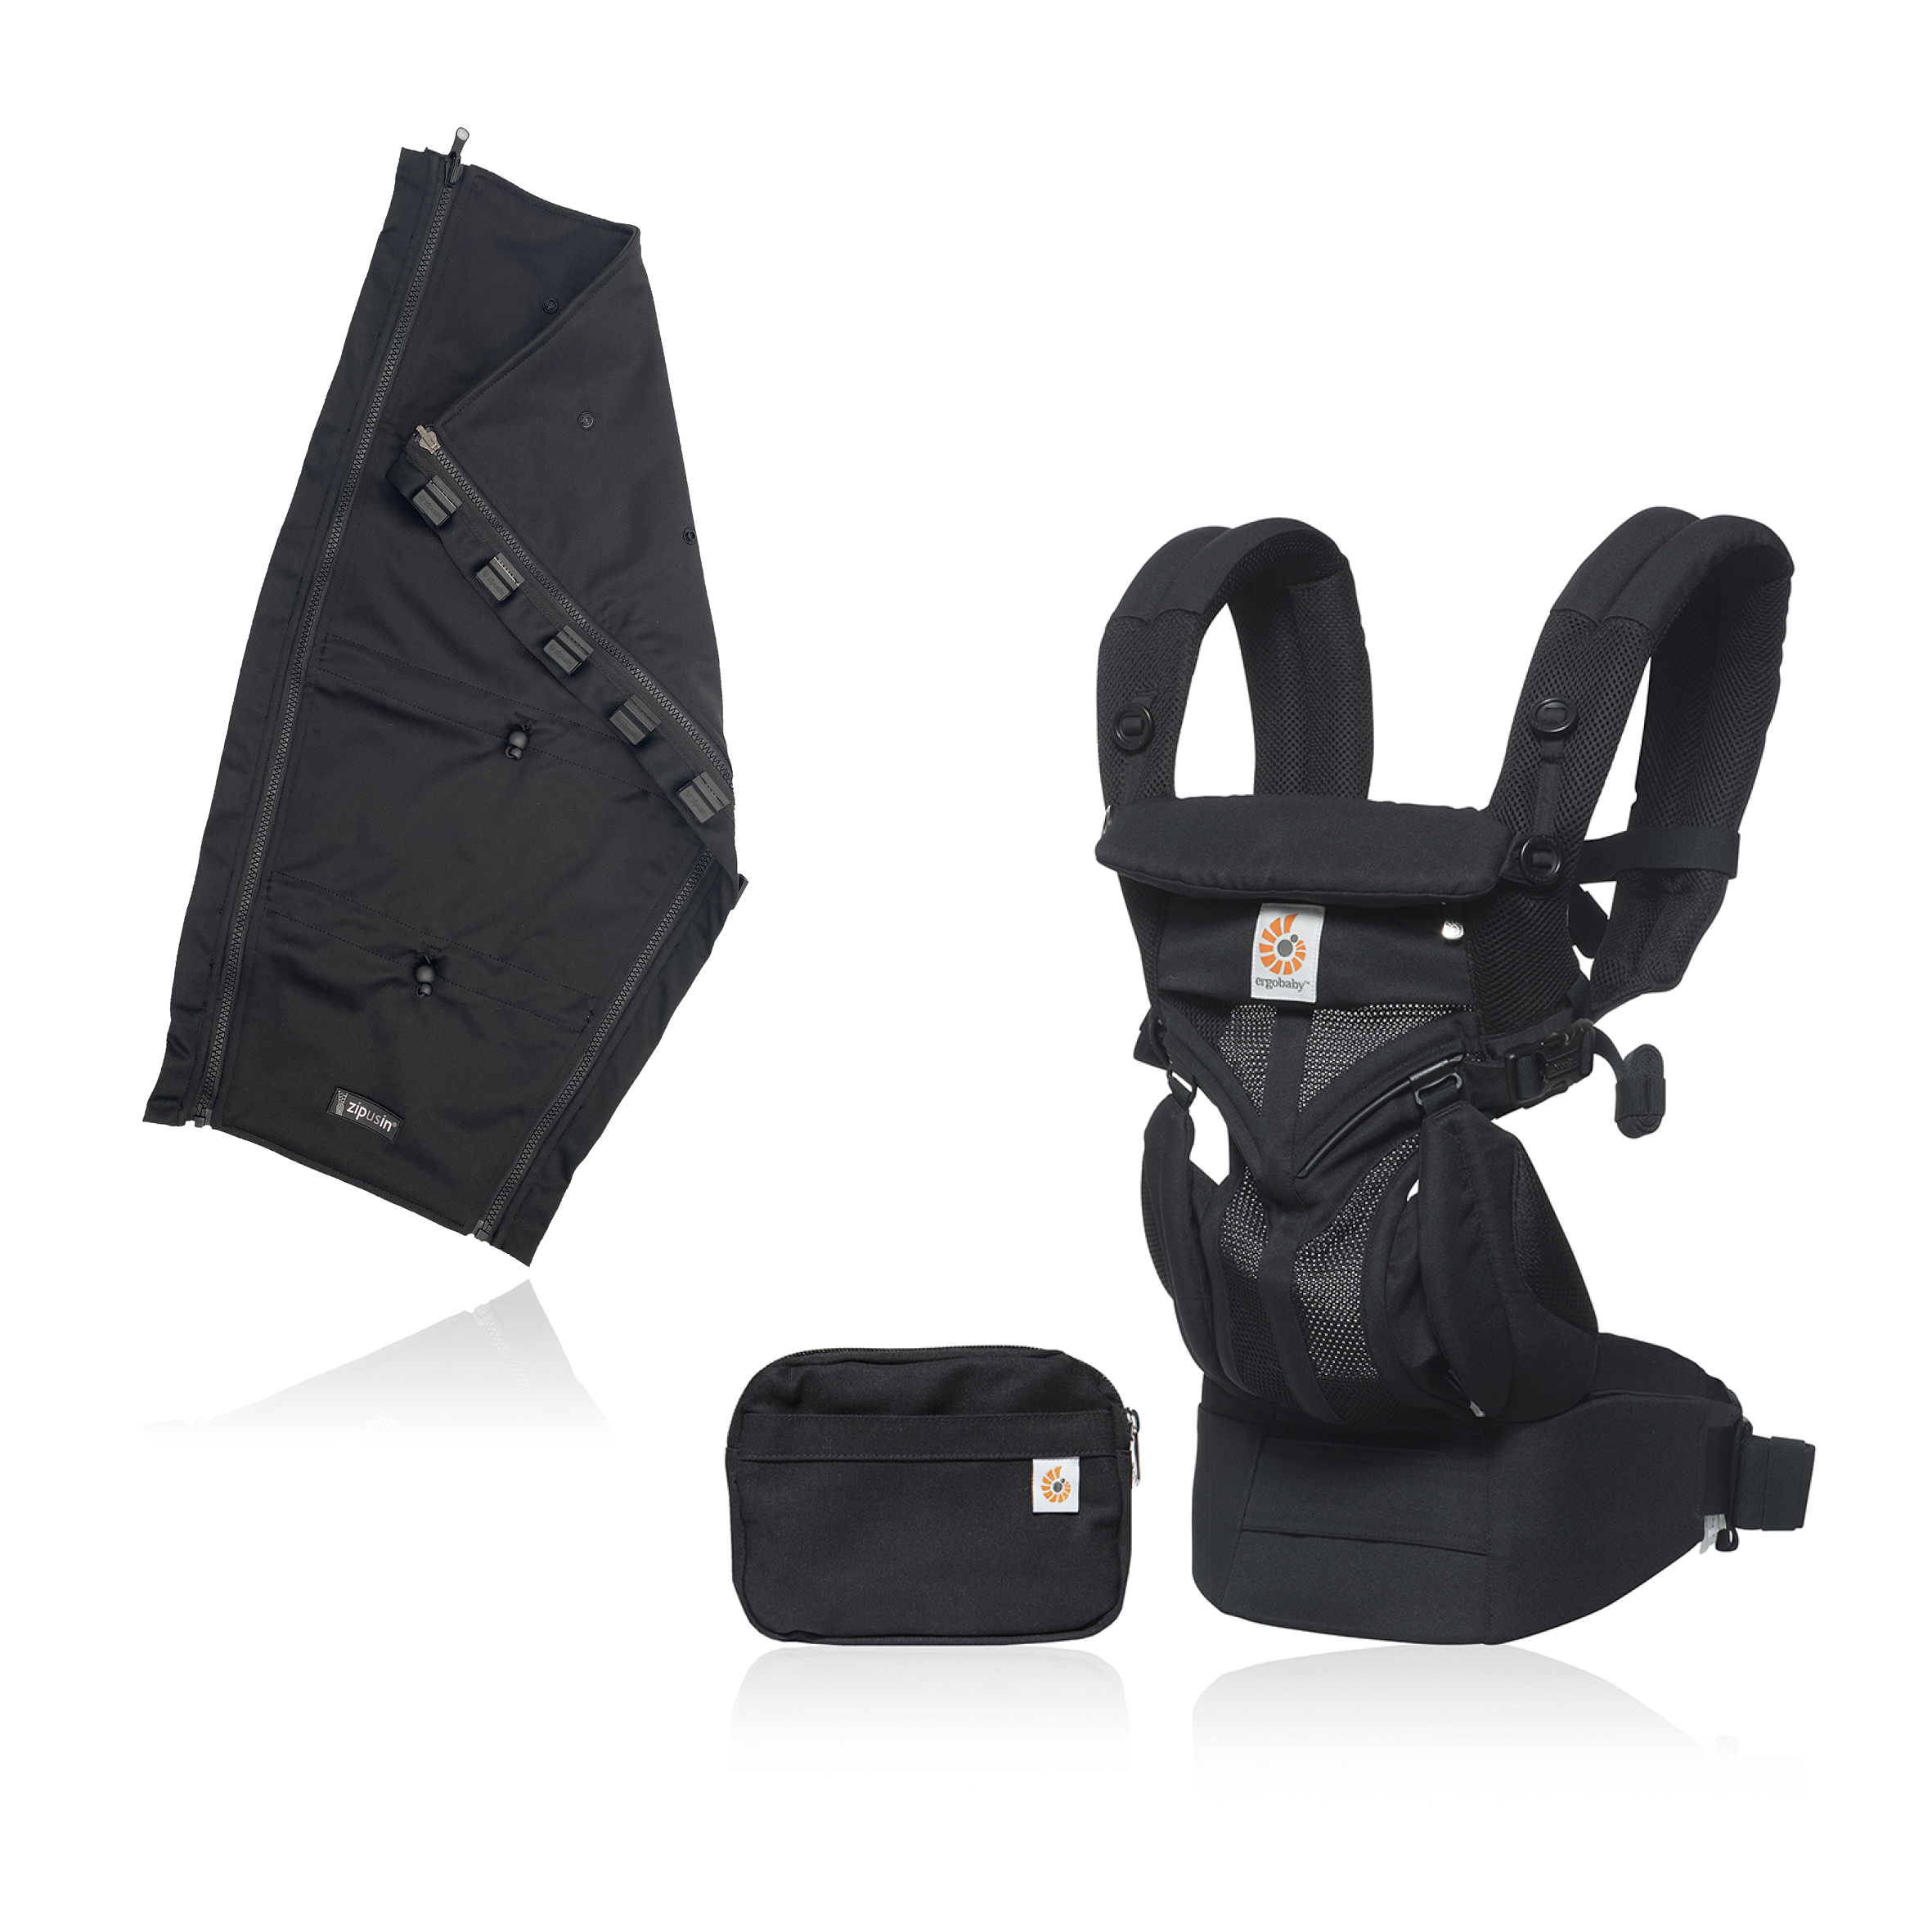 Half Price Universal Jacket Expander Panel With Ergobaby Omni 360 Baby Carrier – Onxy Black